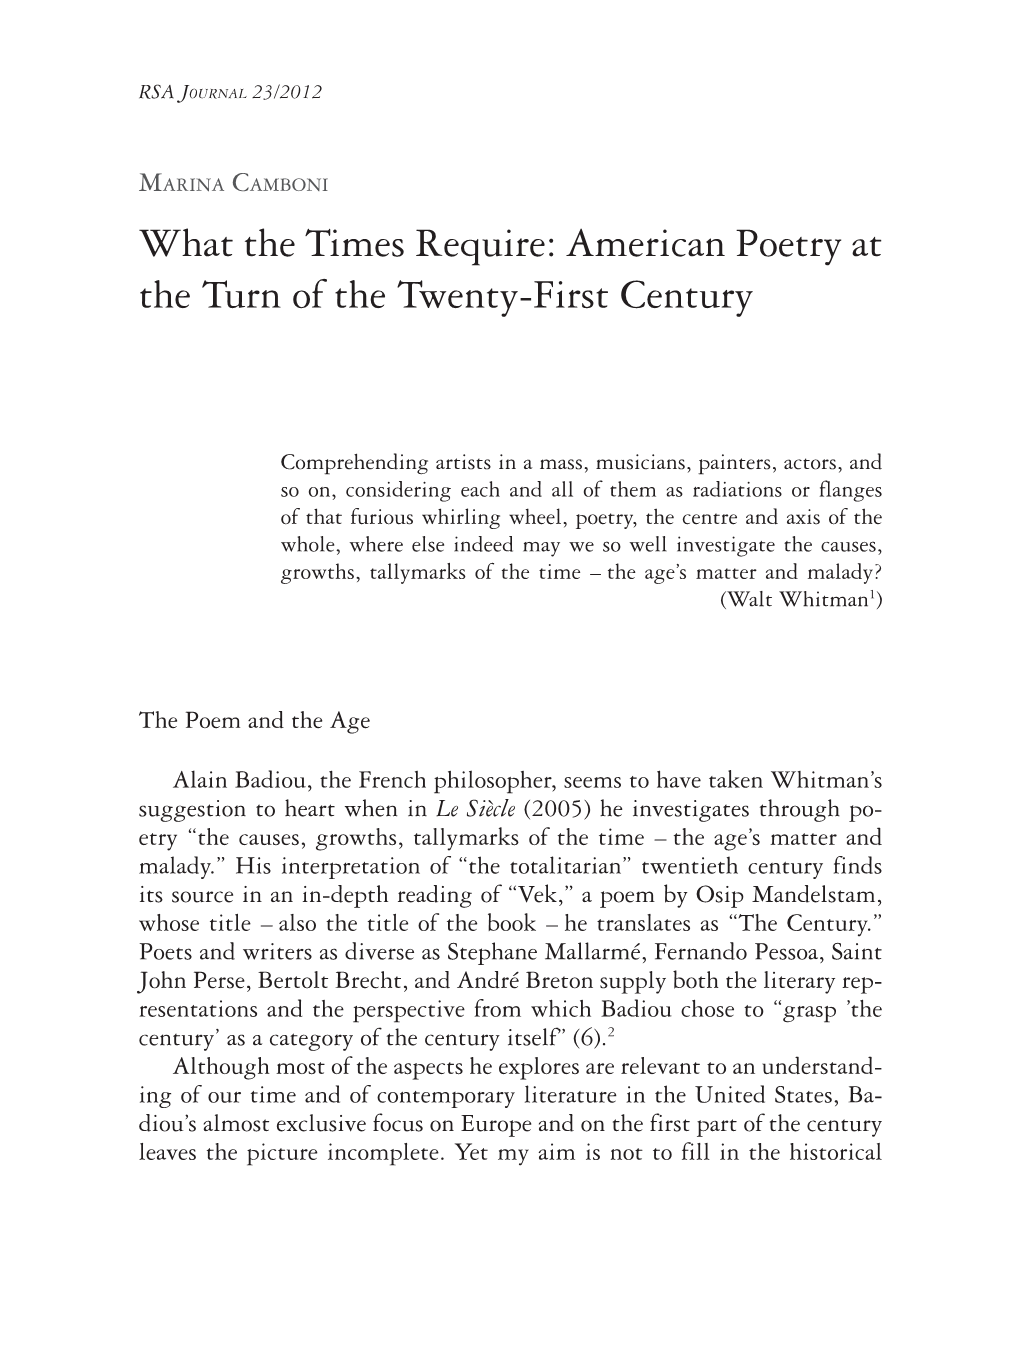 American Poetry at the Turn of the Twenty-First Century